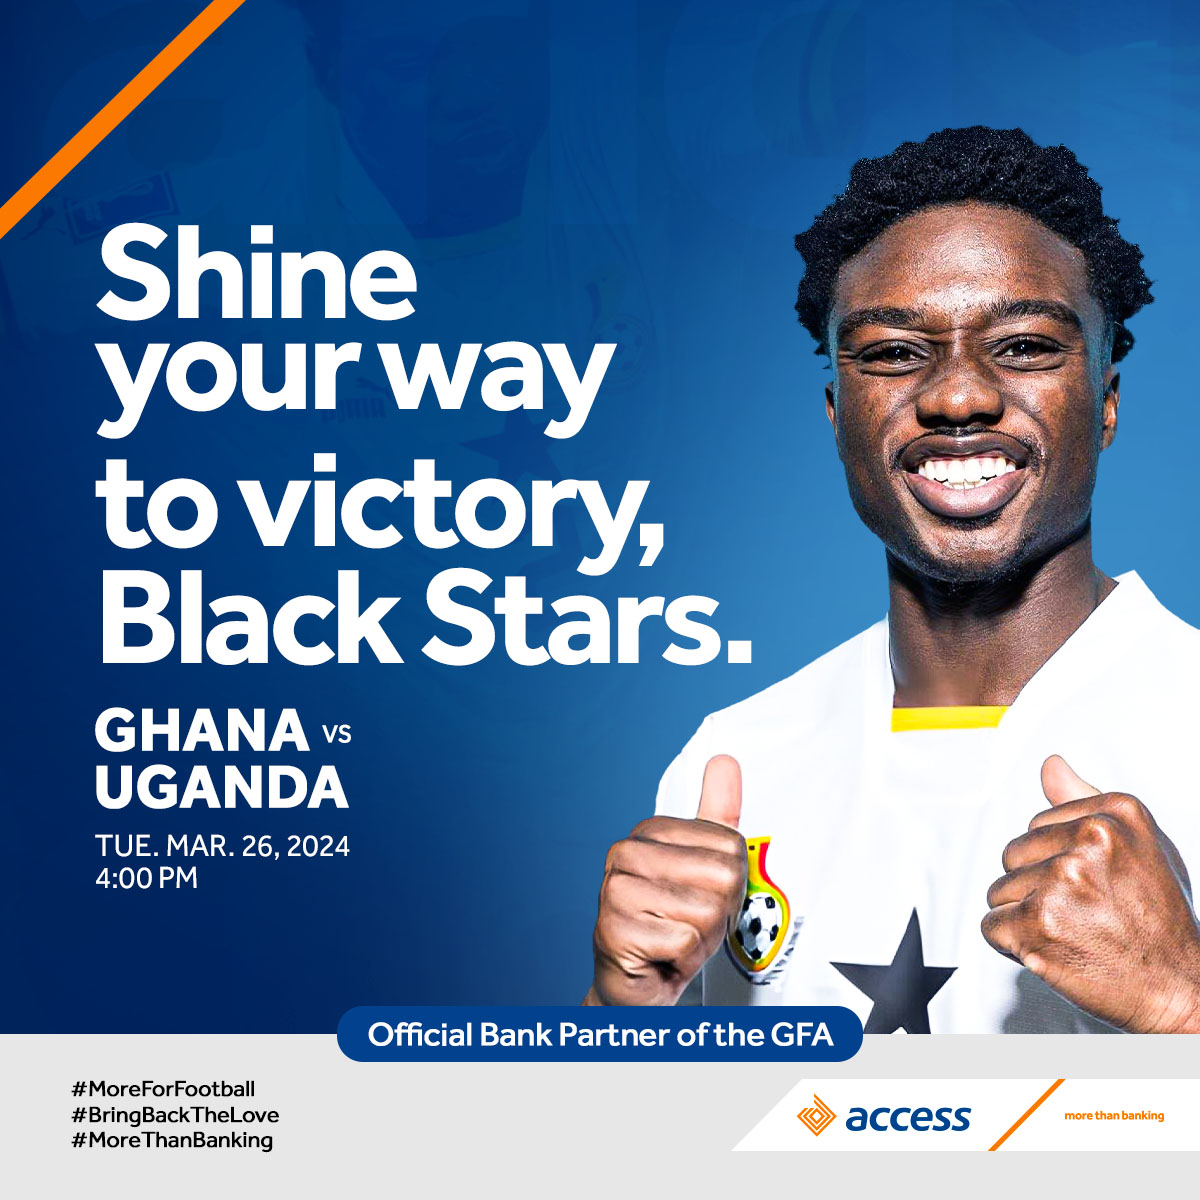 Let's continue to support and cheer our Black Stars on, as they shine their way to victory today 💫🌟. Any predictions for today’s match? Share them below 👇🏾 #BlackStars #MoreThanBanking #AccessBankGhana